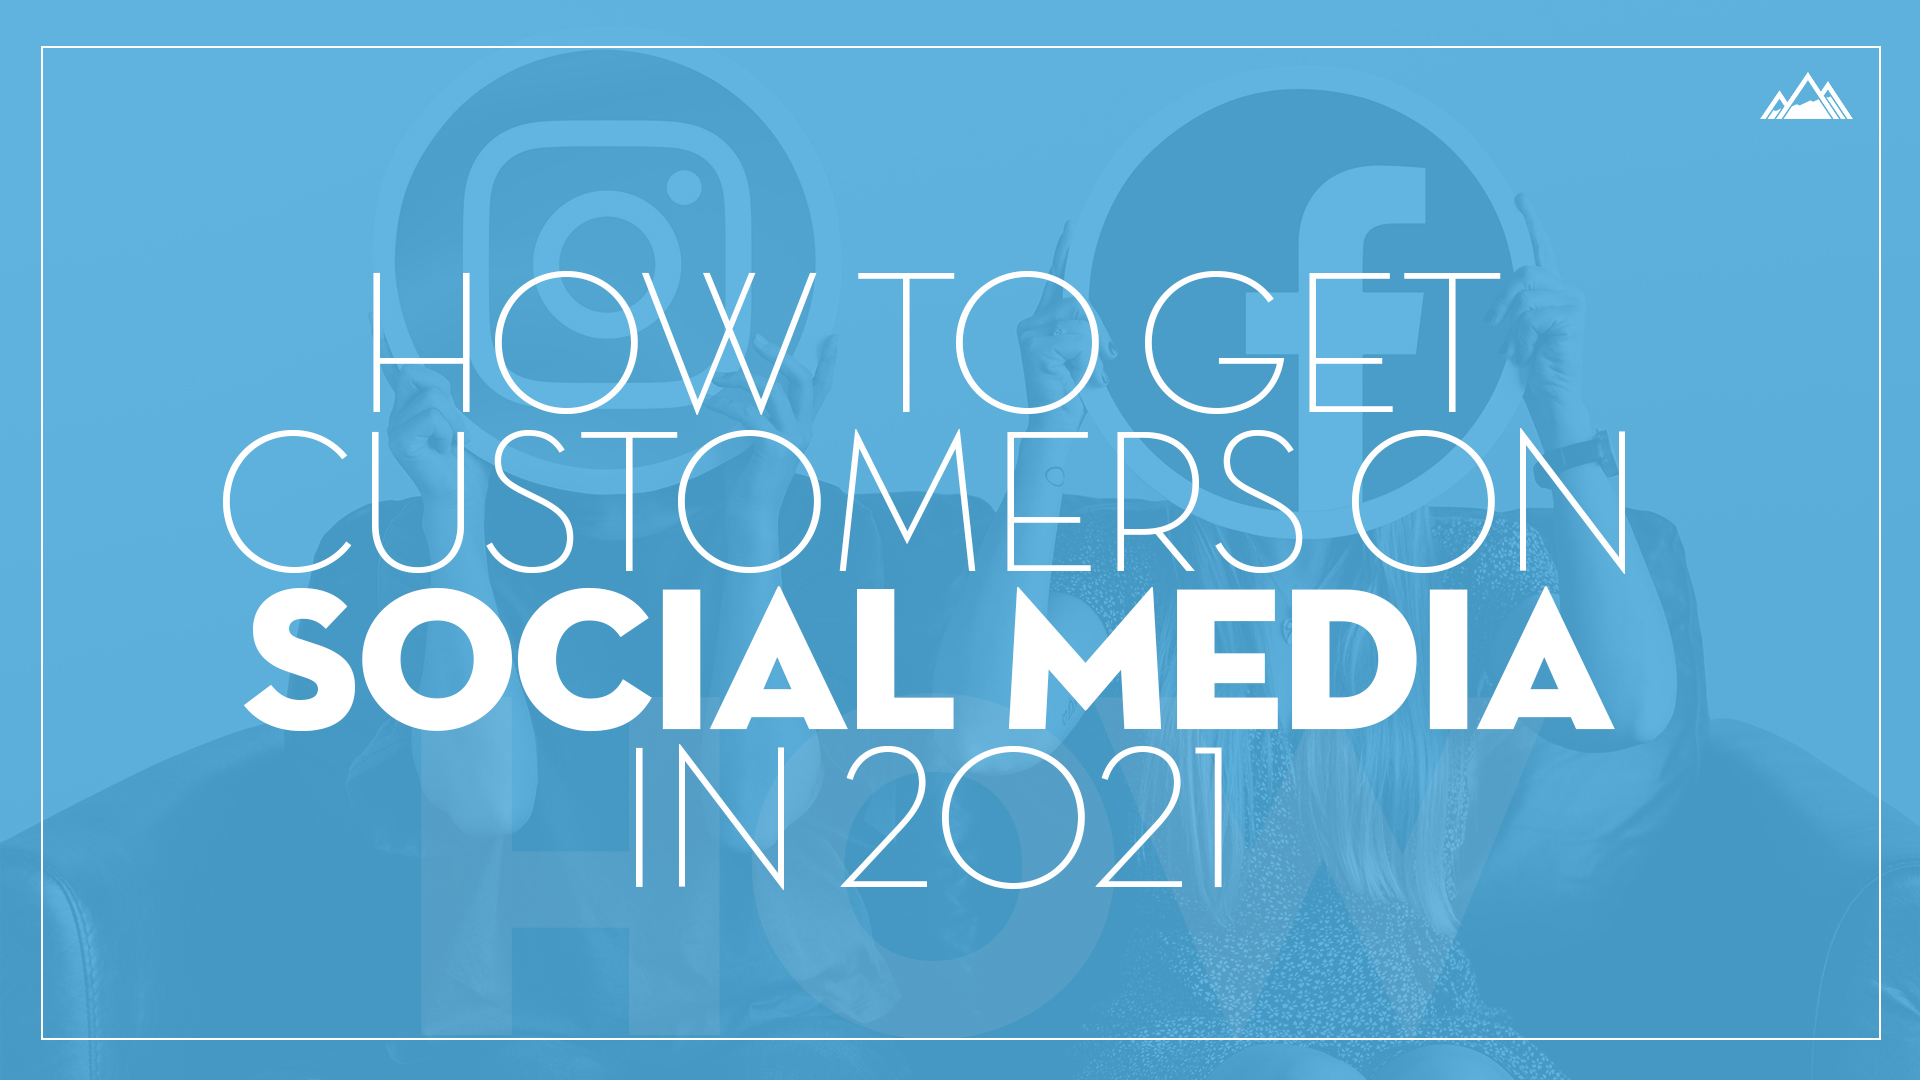 How To Get Customers On Social Media In 2021